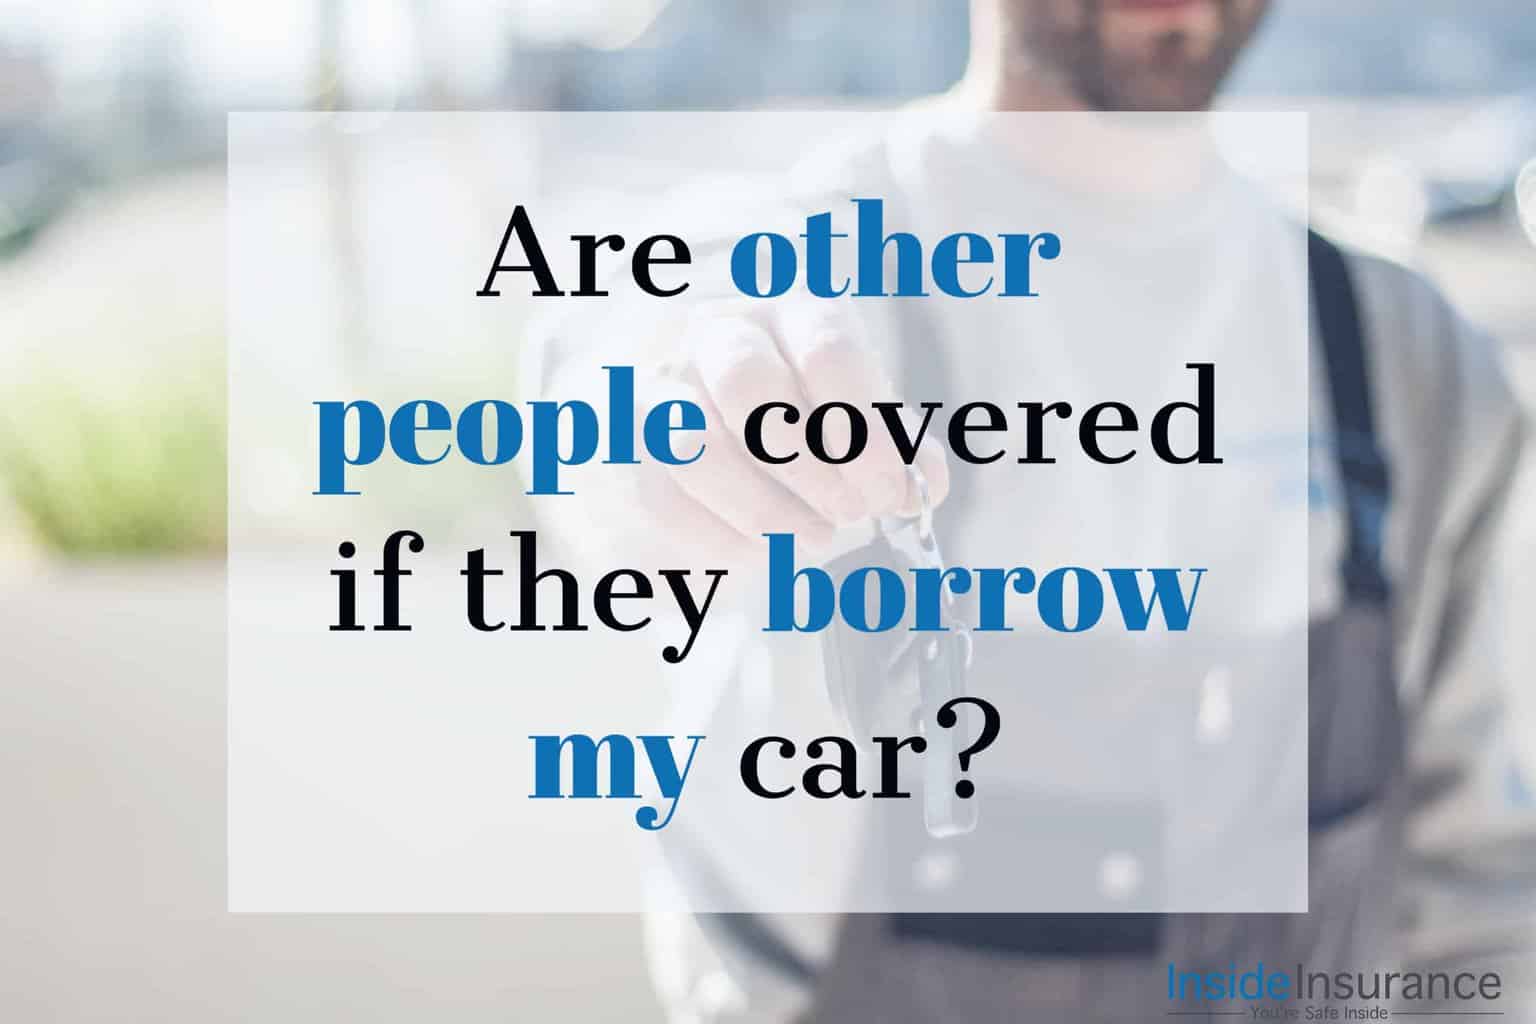 Are other people covered if they borrow my car?